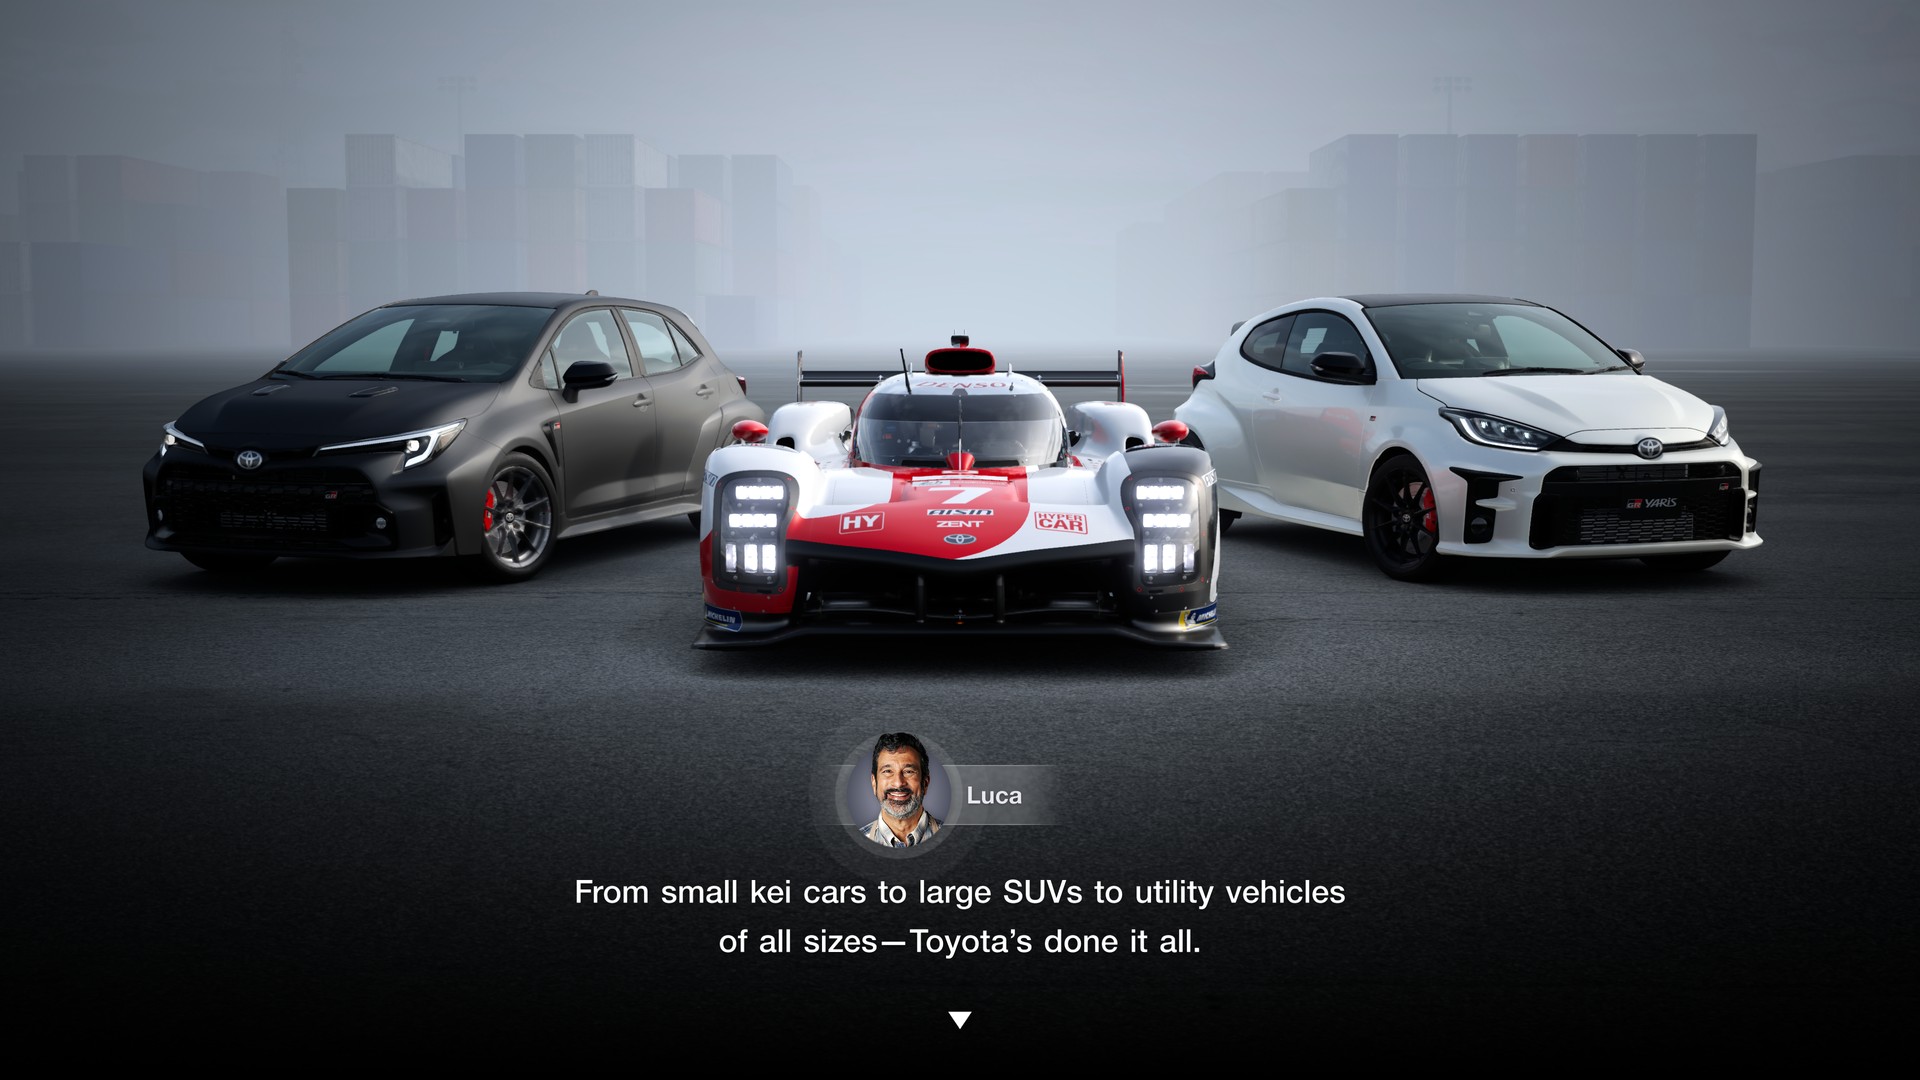 The latest Gran Turismo 7 update adds a wicked time attack Honda